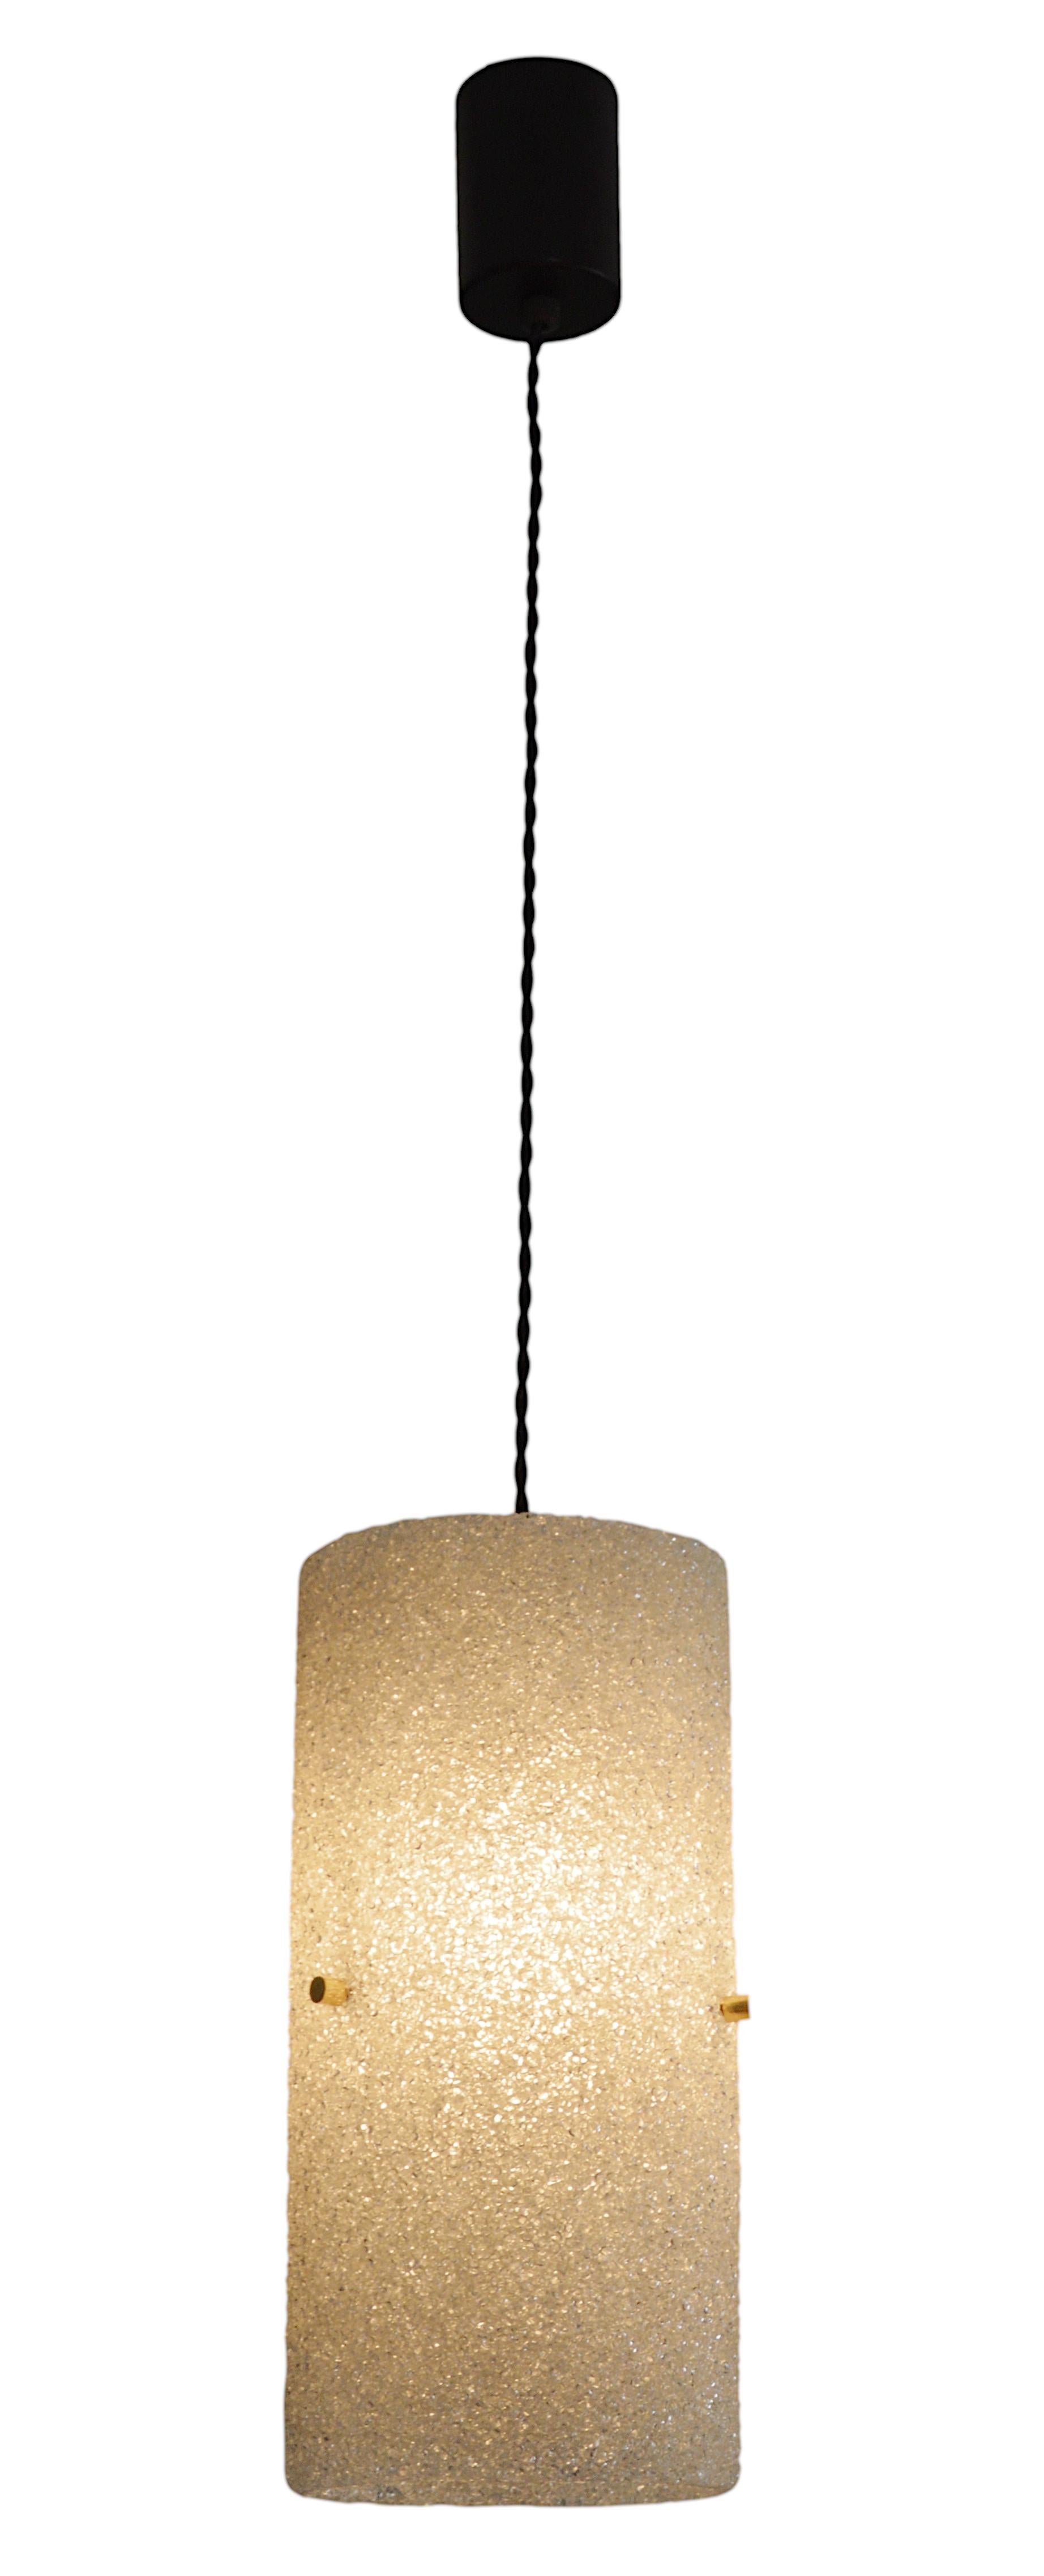 French mid-century pendant, France, 1960s. Perspex shade hung at its black patinated brass canopy. Three brass cabochons on the body of the shade to attach it to the fixture. Brand new twisted thread. Height : 31.5